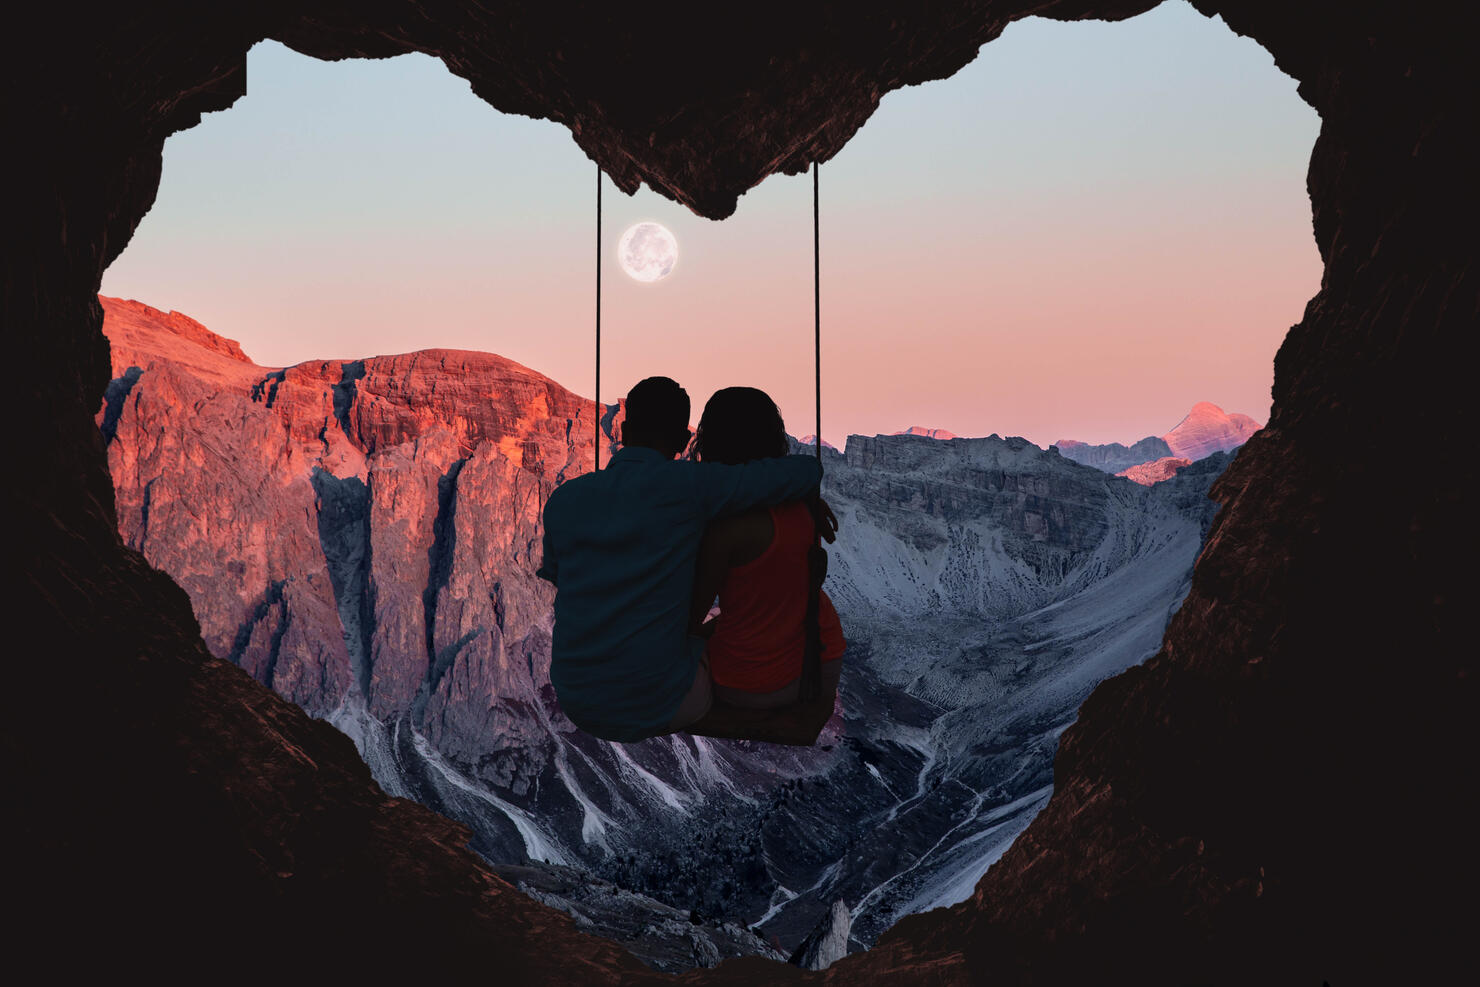 Couple on swing contemplating the mountains in a romantic view with heart shape.